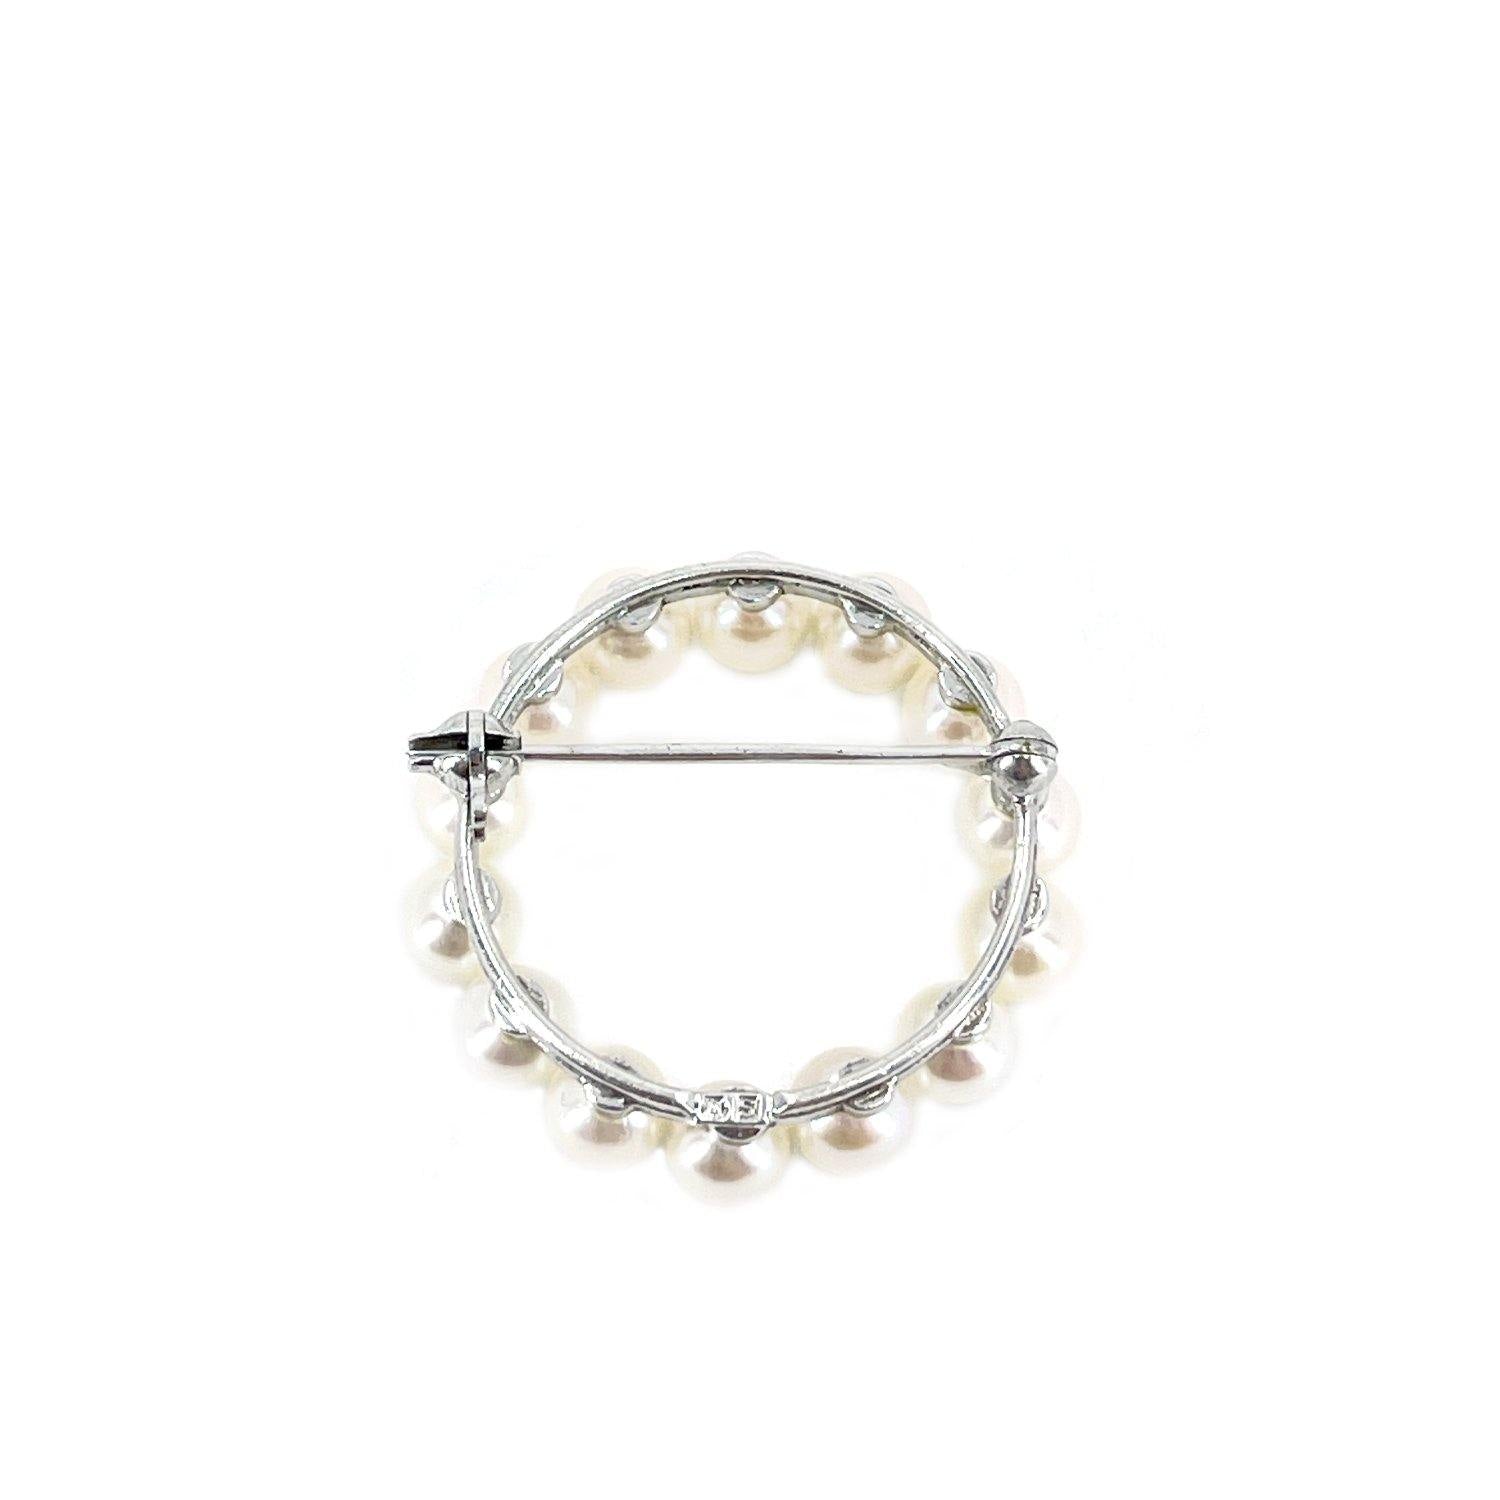 Mikimoto Circle Japanese Cultured Saltwater Akoya Pearl Brooch- Sterling Silver